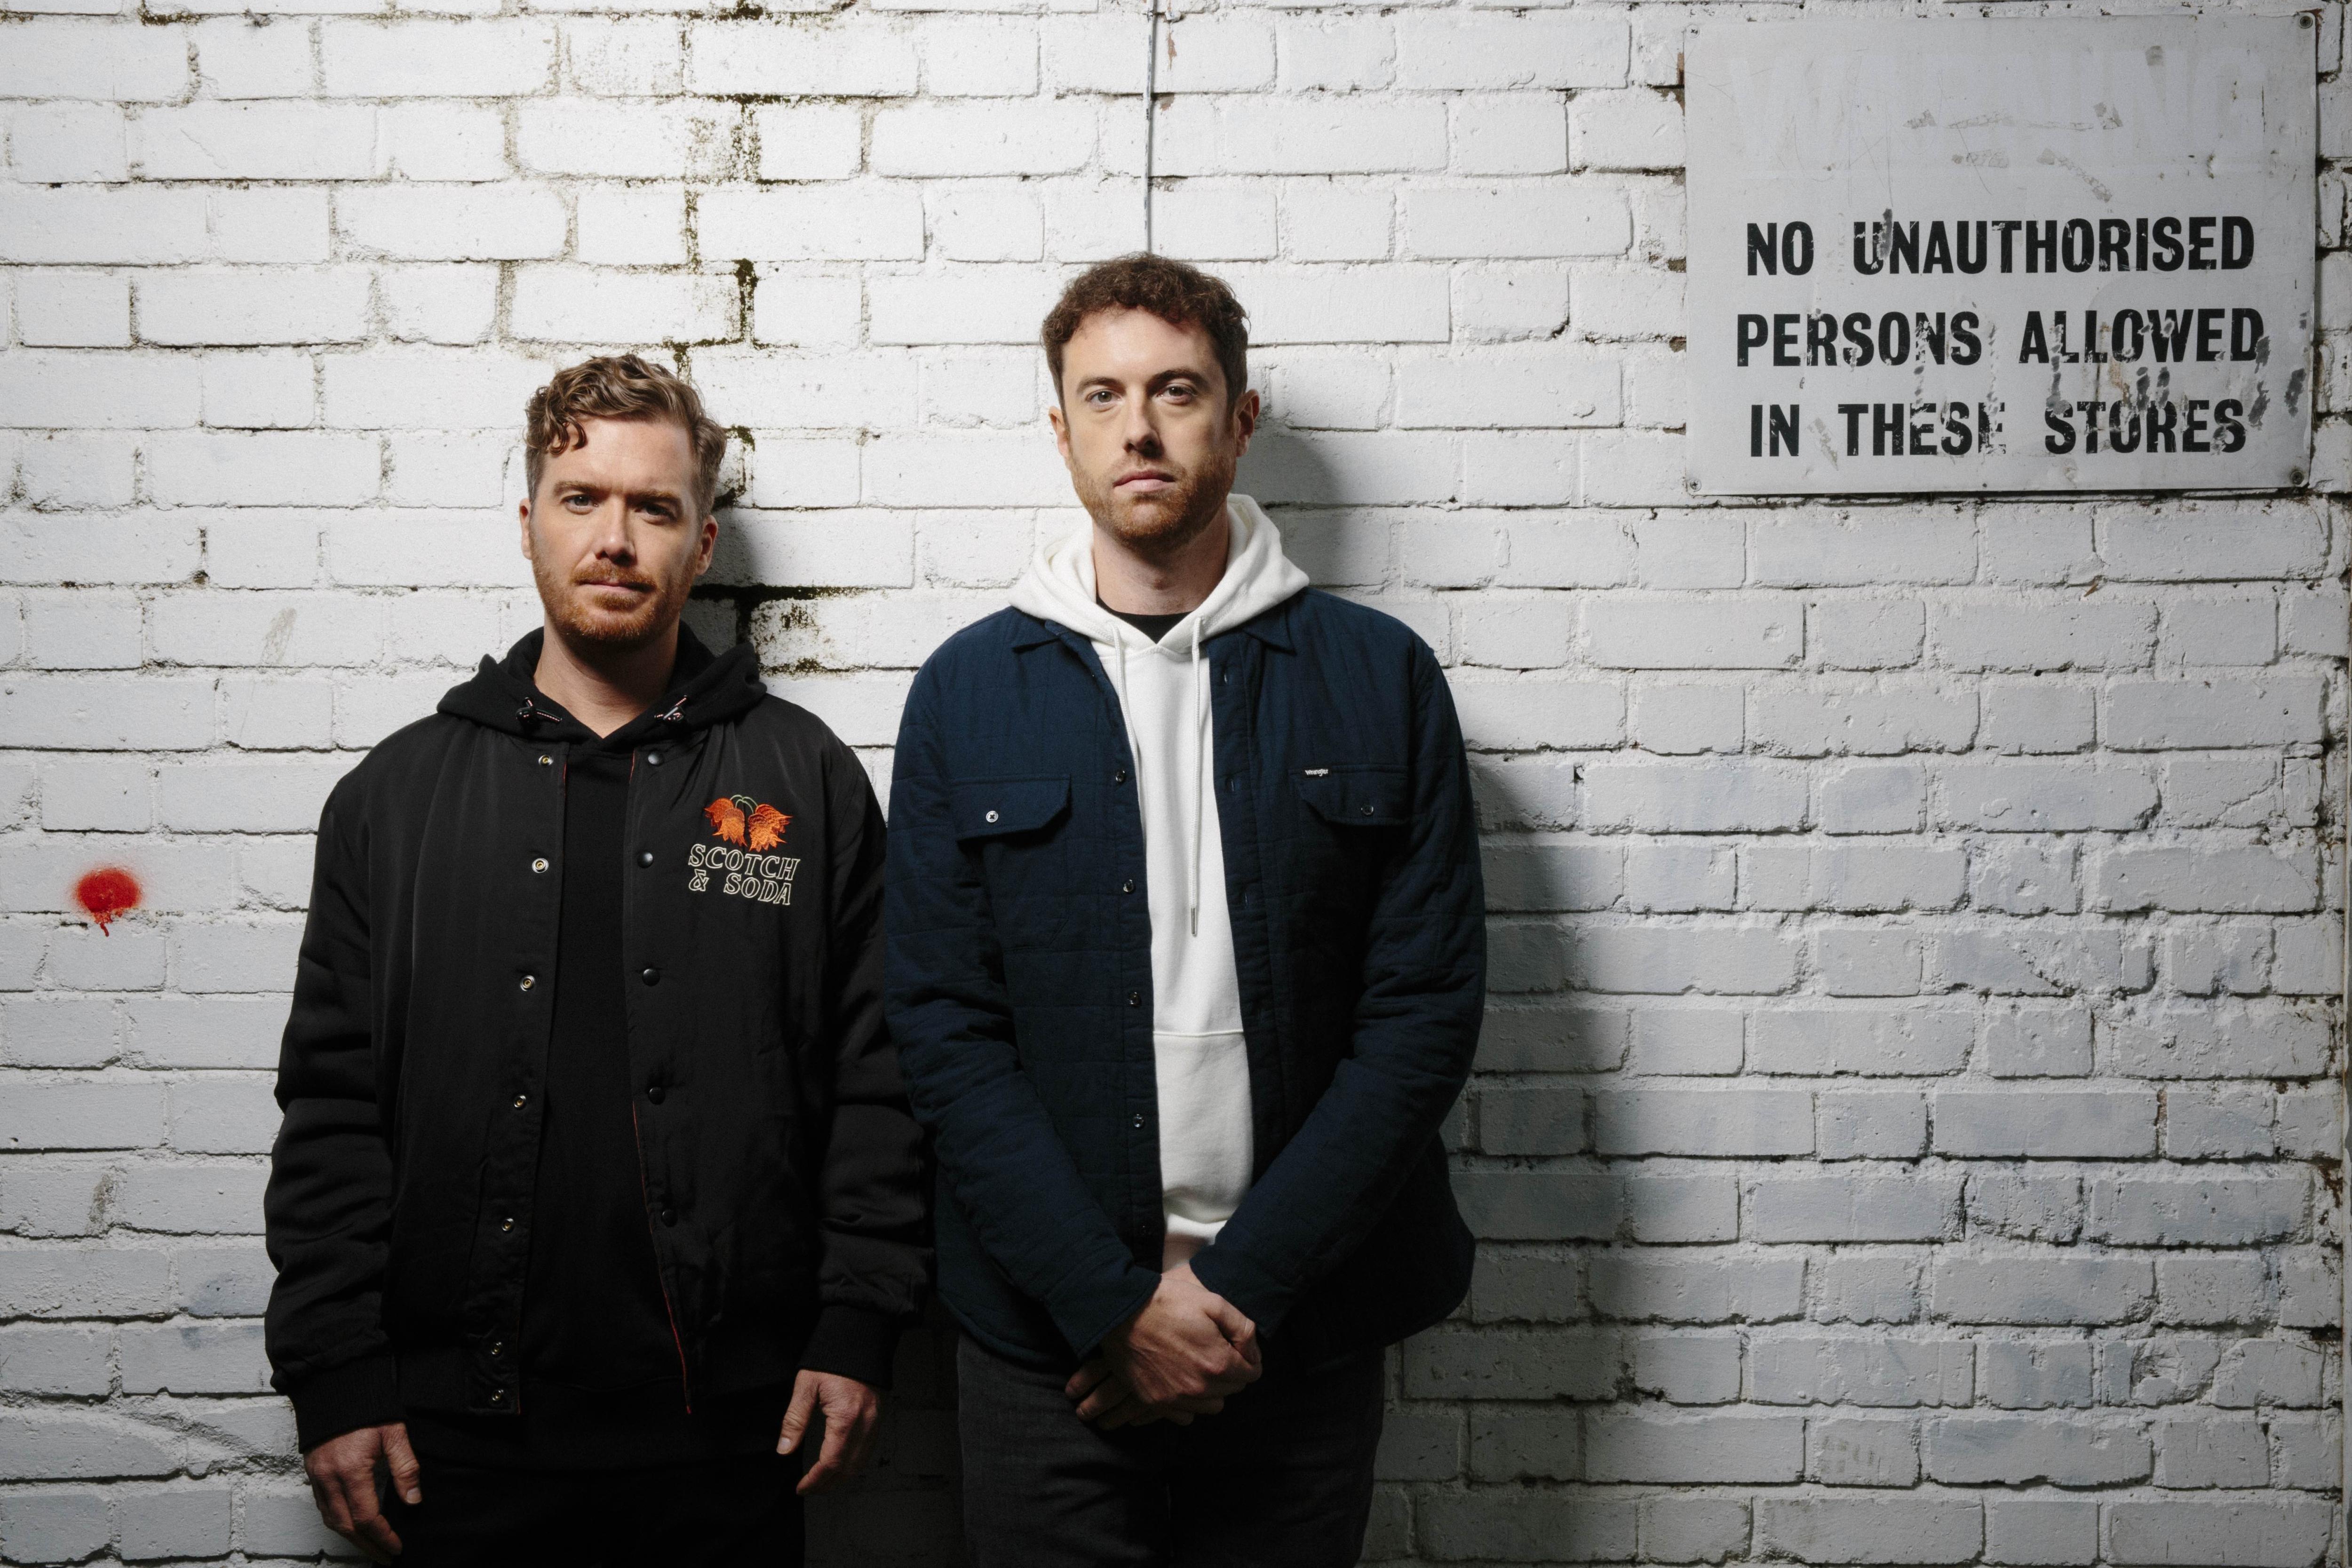 DJ/producer duo Gorgon City pose in front of a white brick wall